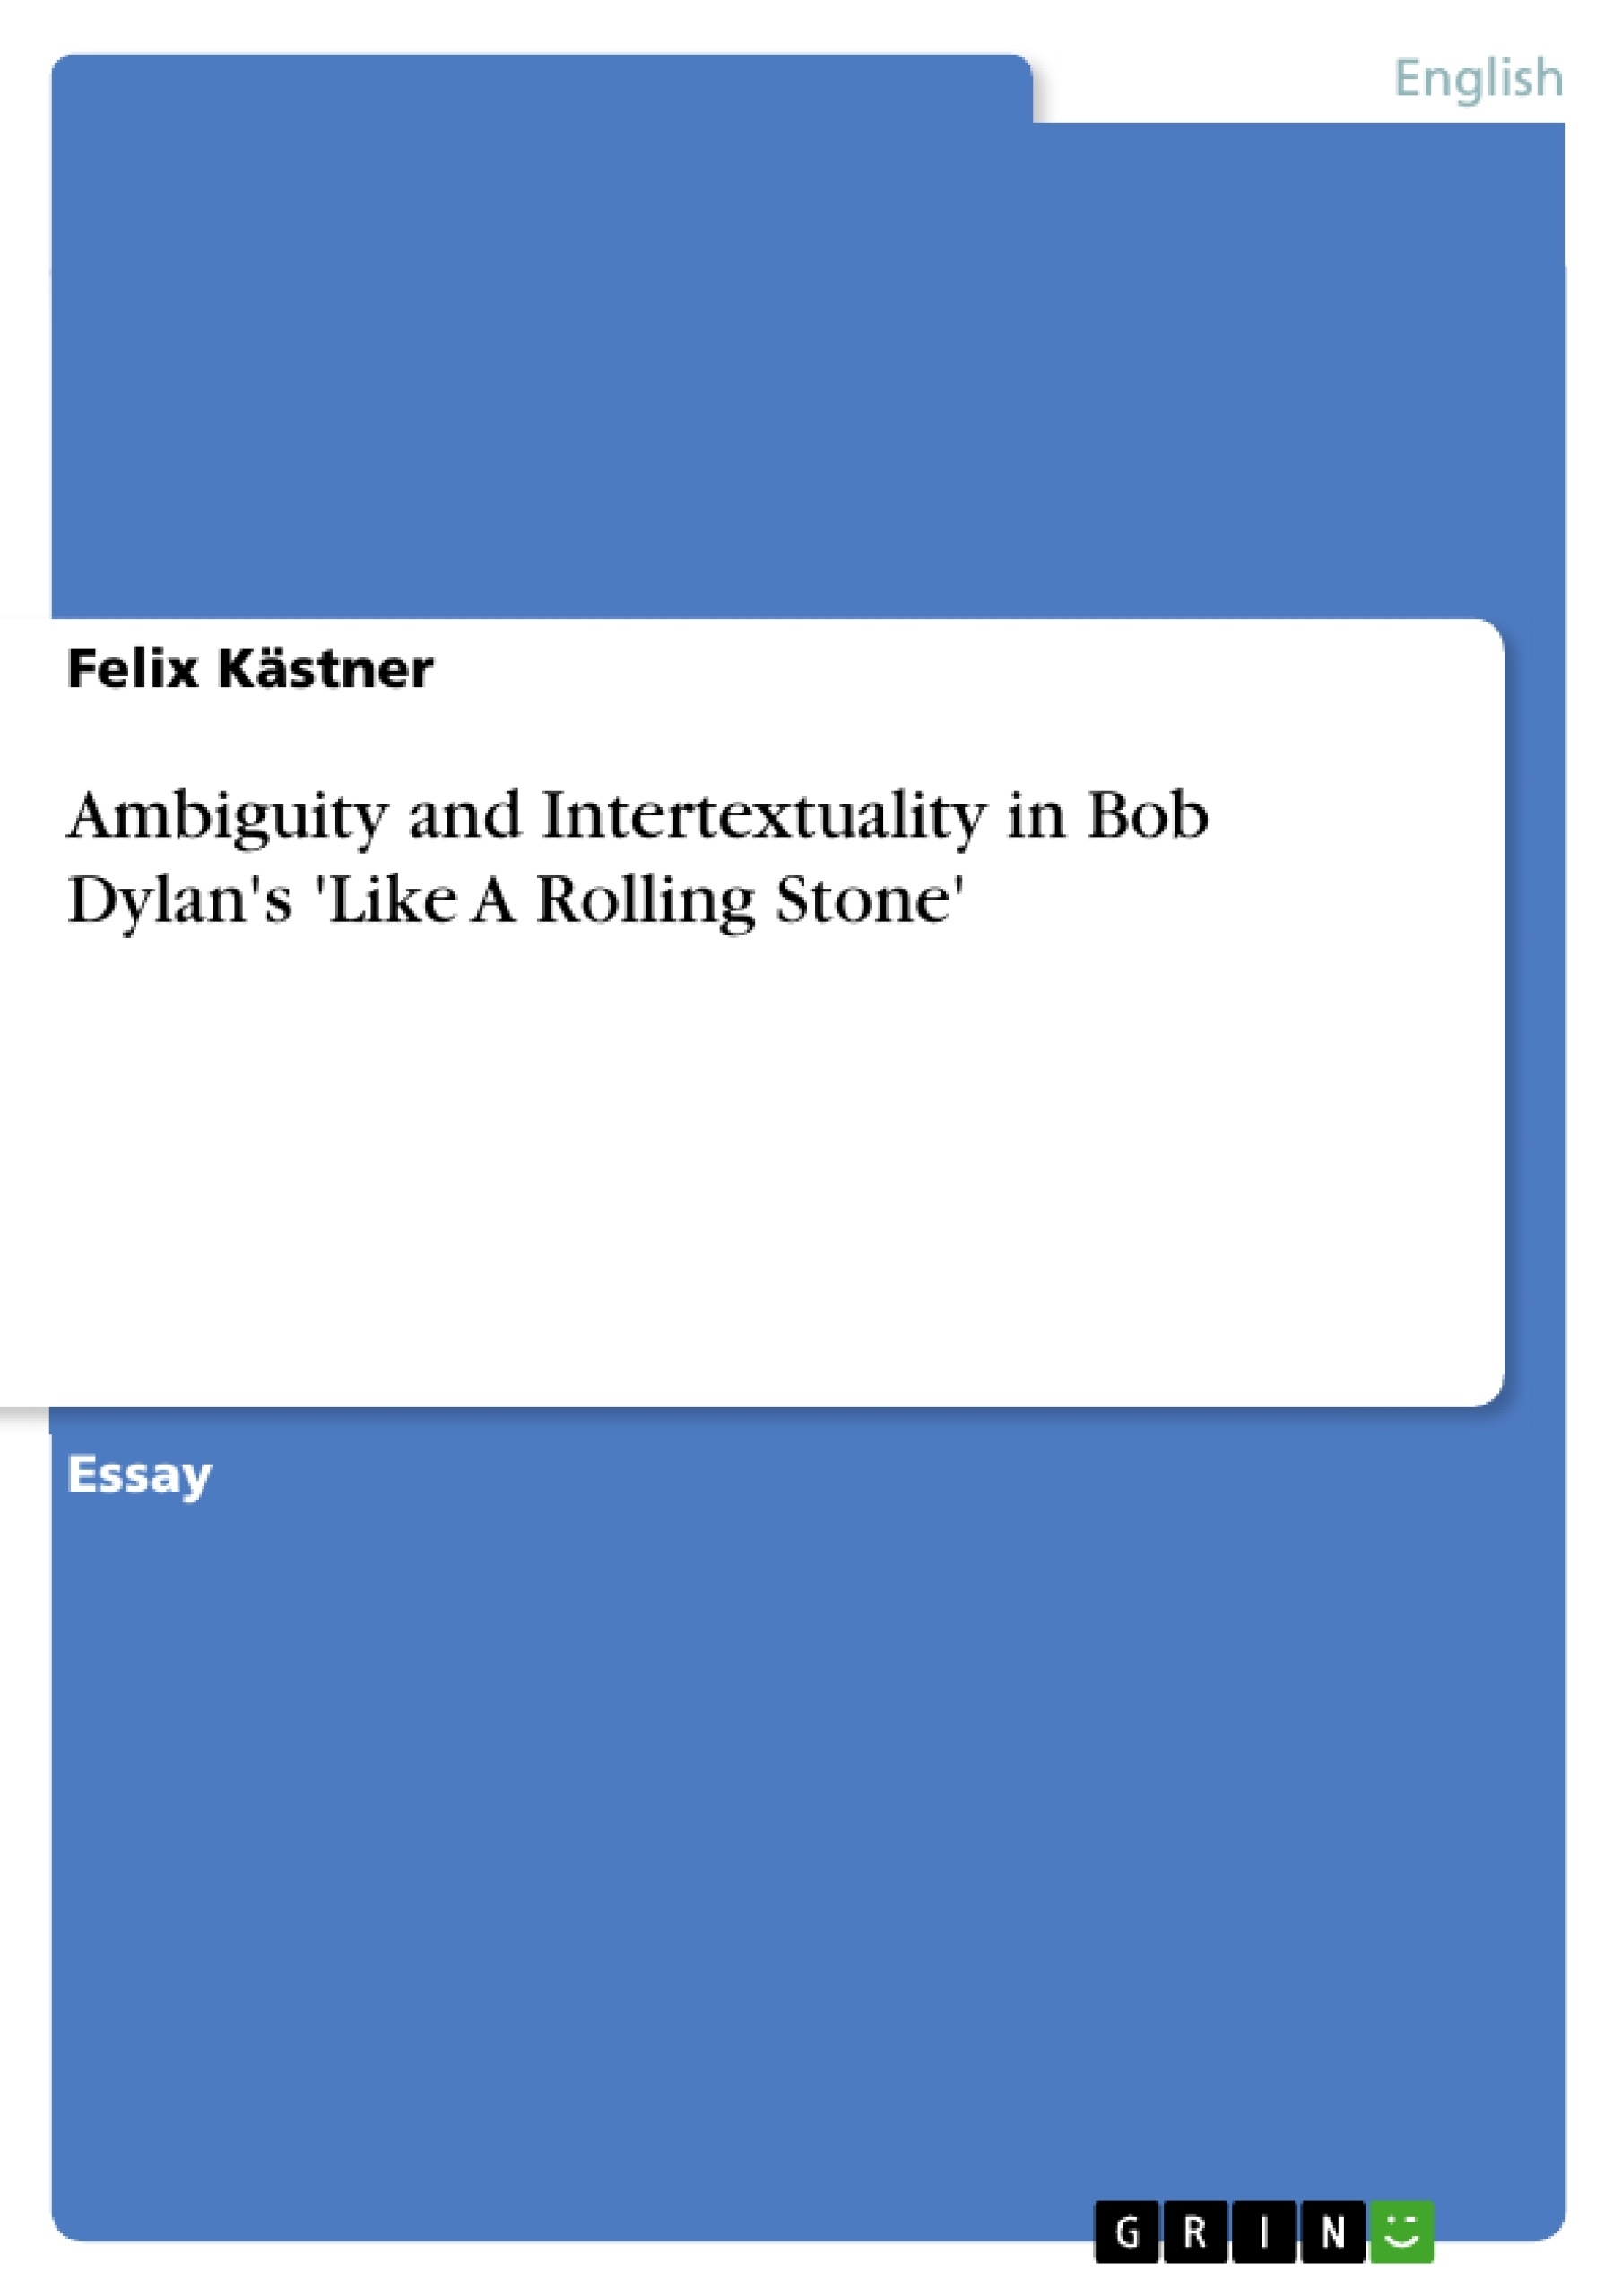 Title: Ambiguity and Intertextuality in Bob Dylan's 'Like A Rolling Stone'